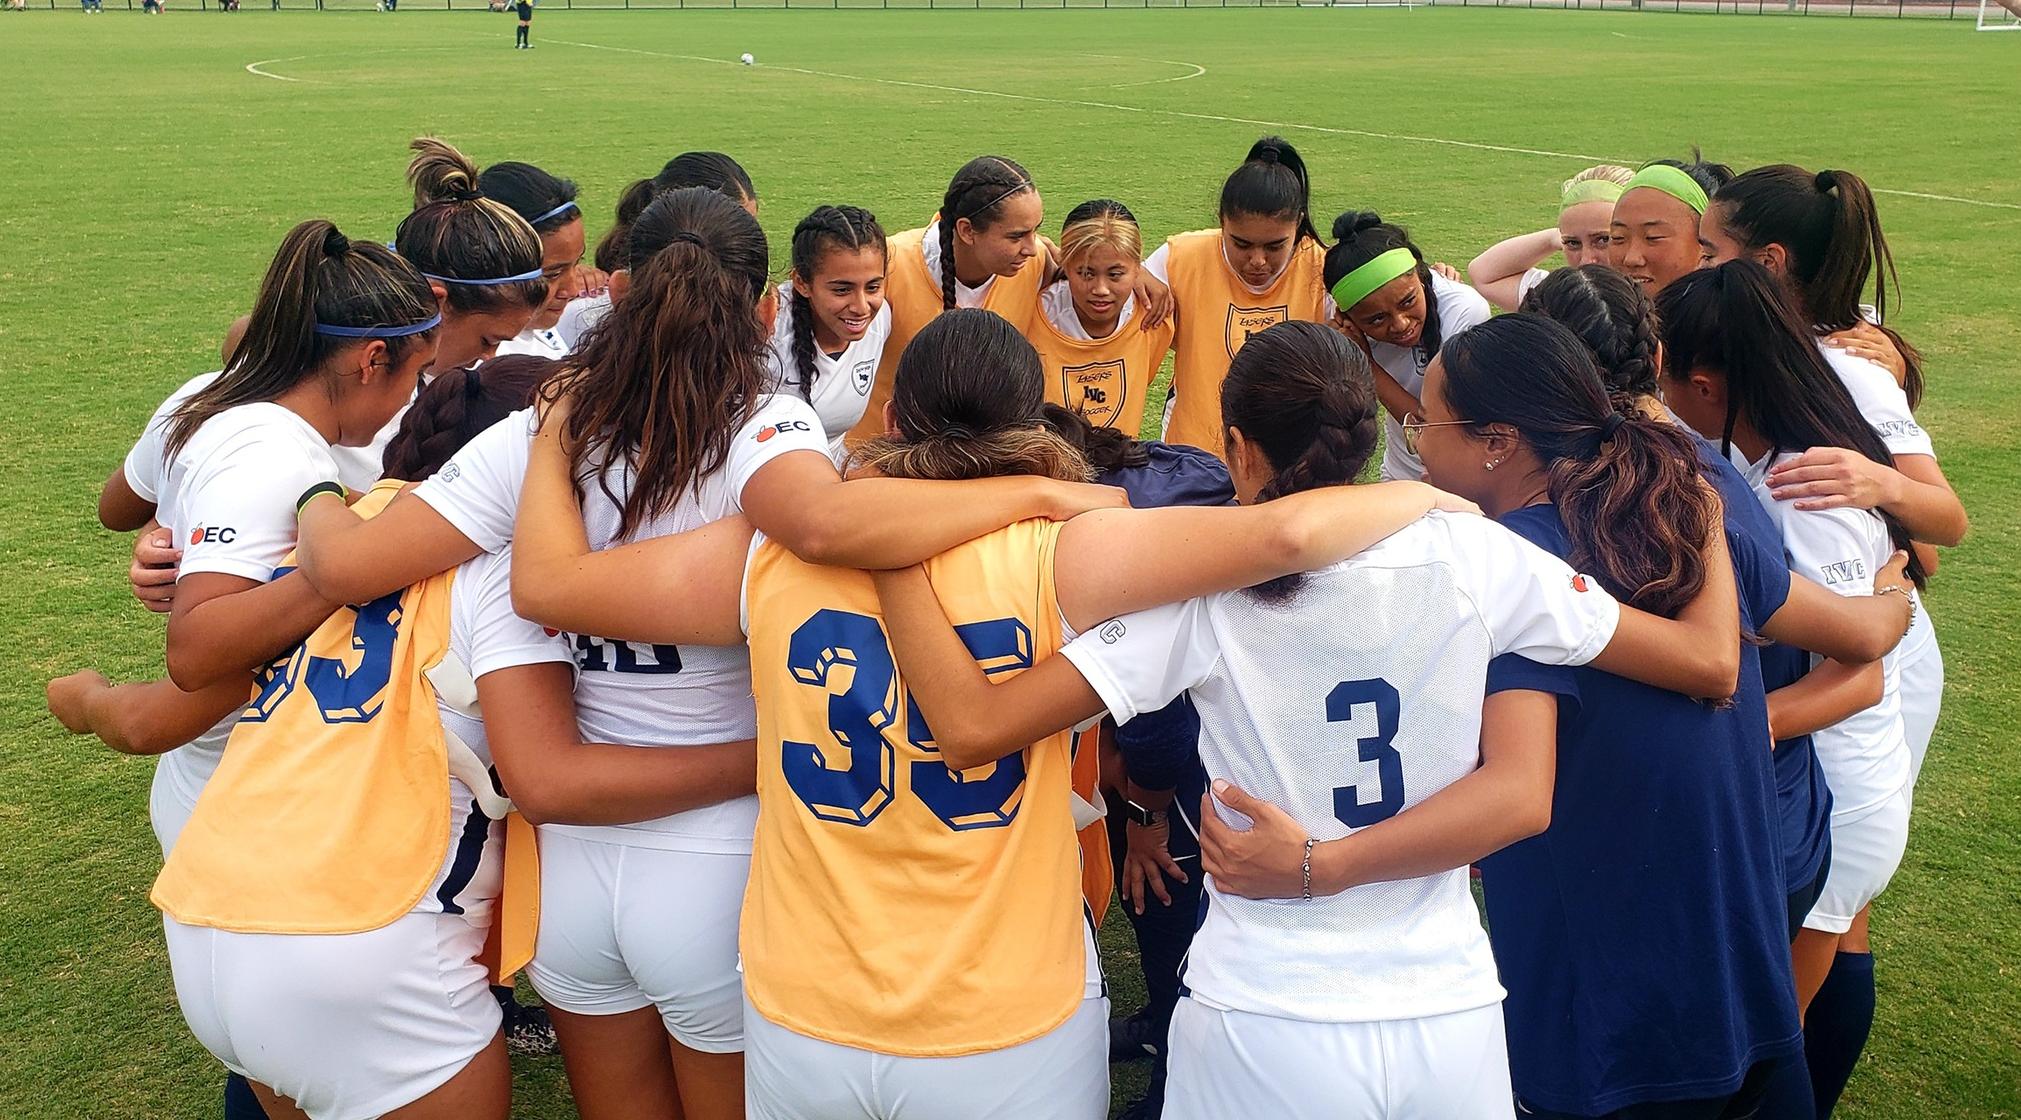 Women's soccer team takes down Golden West on the road